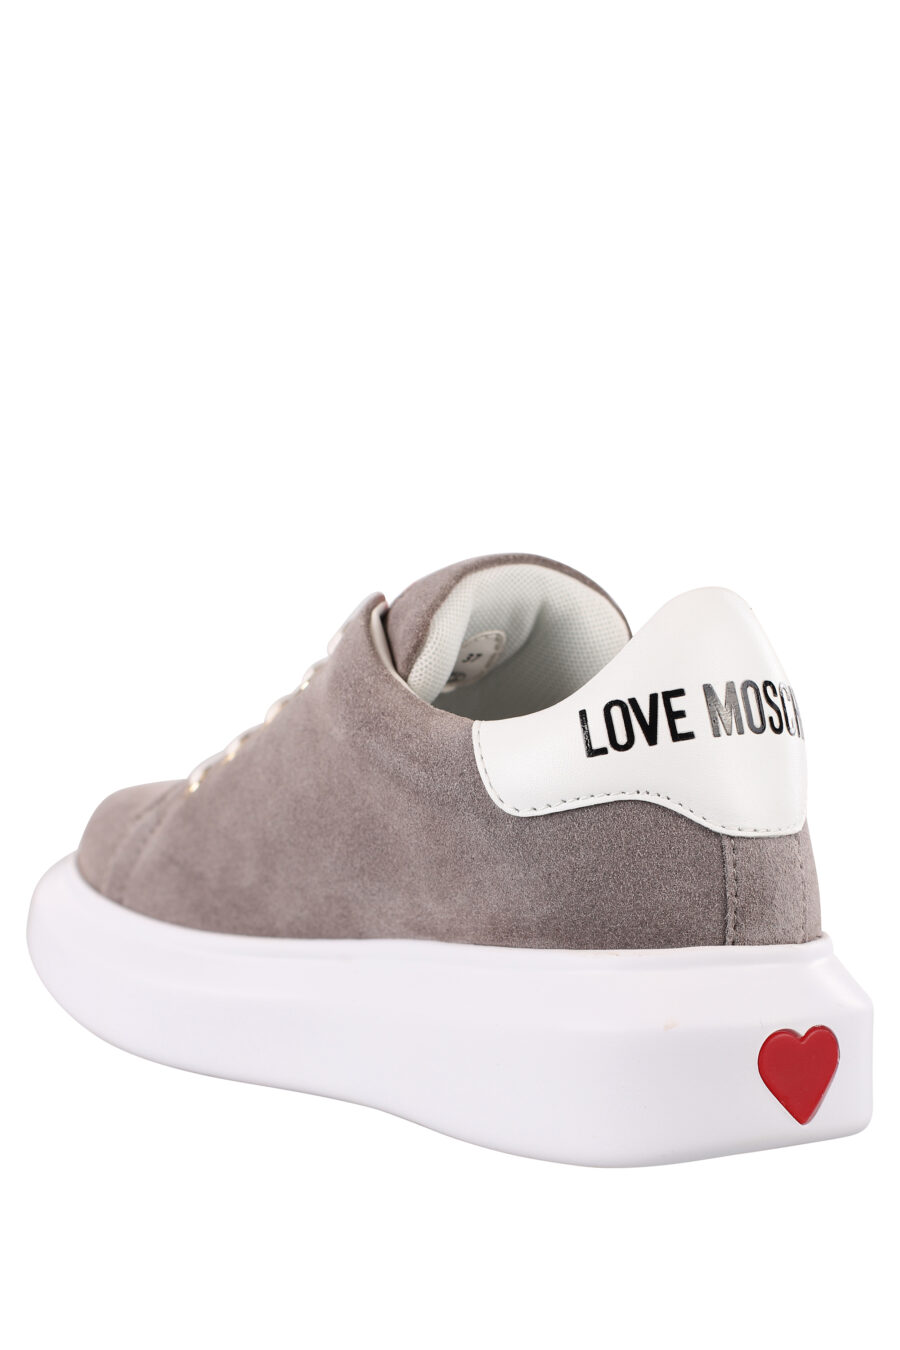 Grey trainers with gold metal logo and white sole - IMG 1182